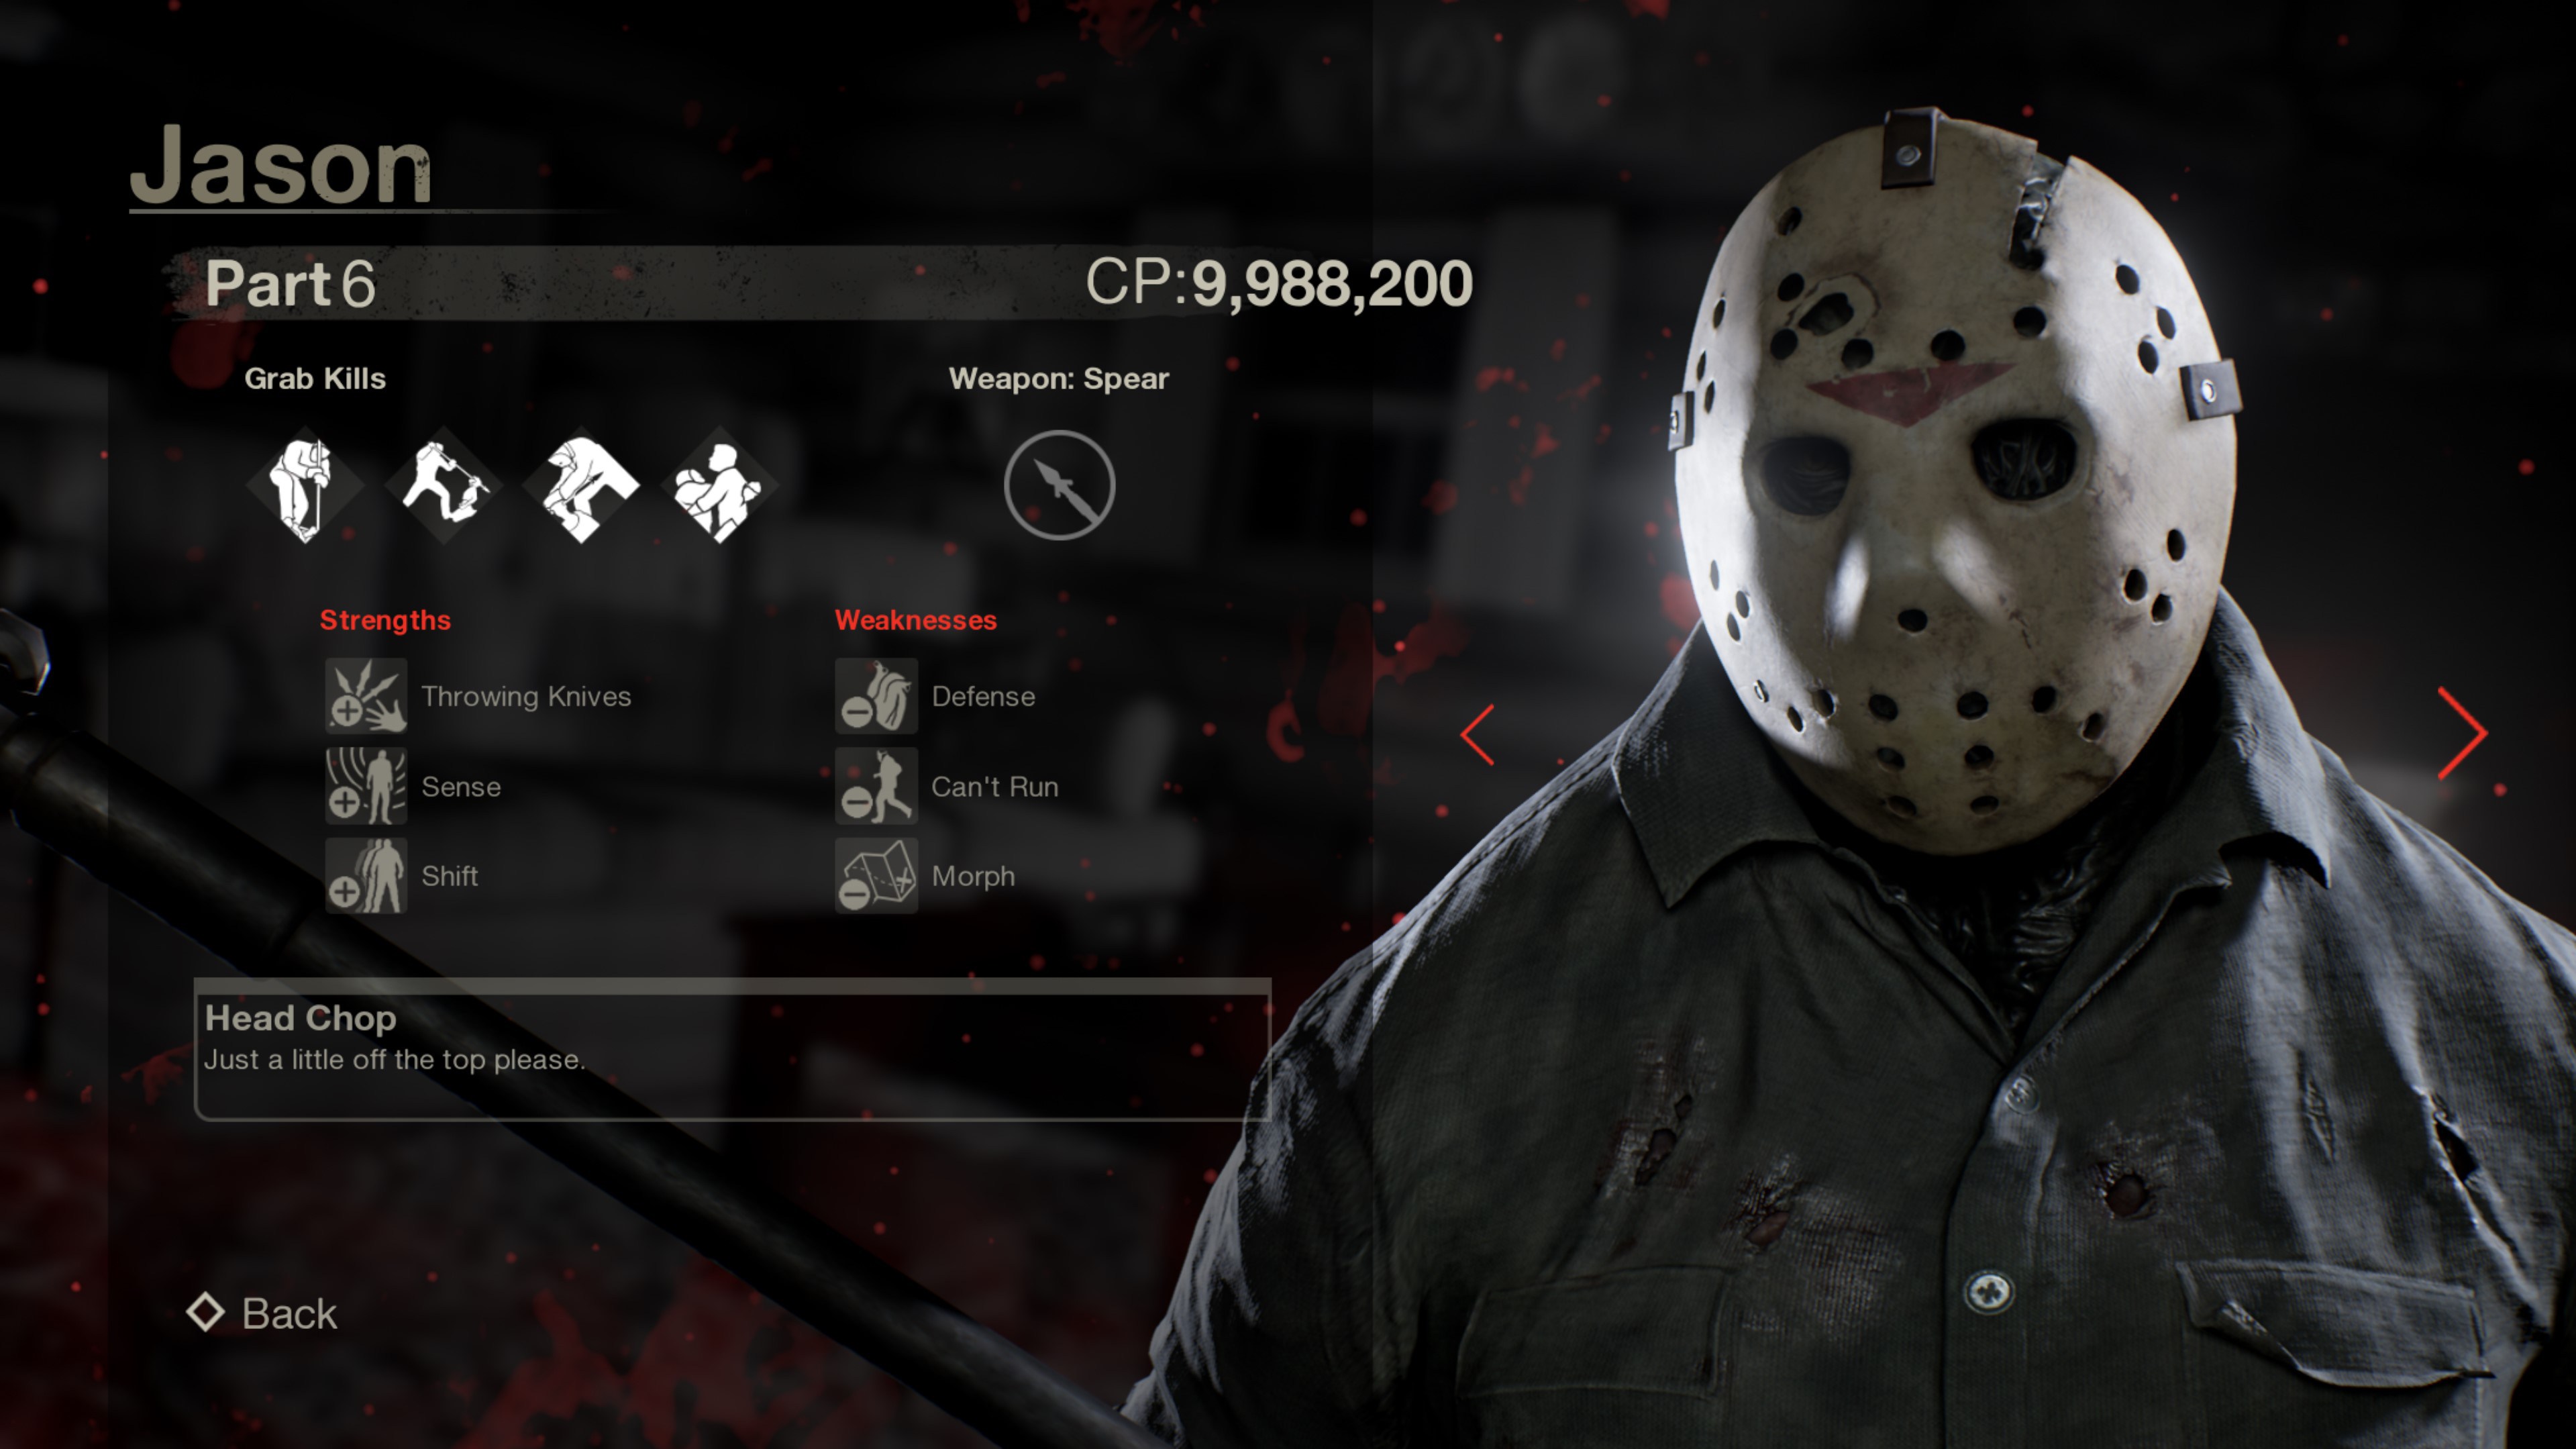 Friday The 13th: The Game — Live Your Own Camp Crystal Lake Summer